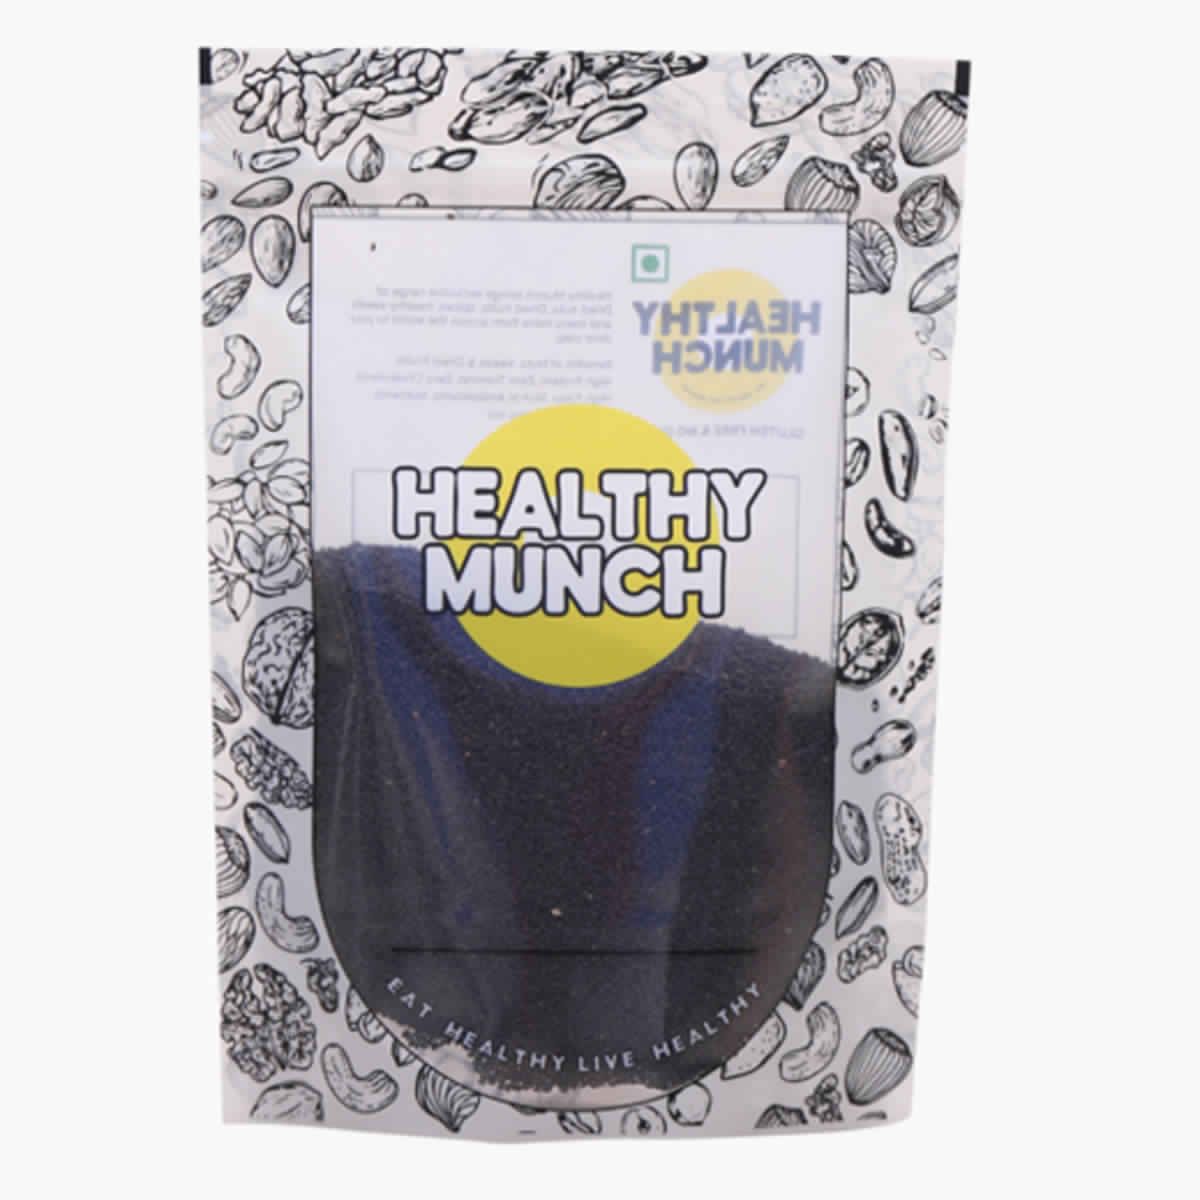 Buy Healthy Munch Basil Seeds 200 gms at Best Price Online